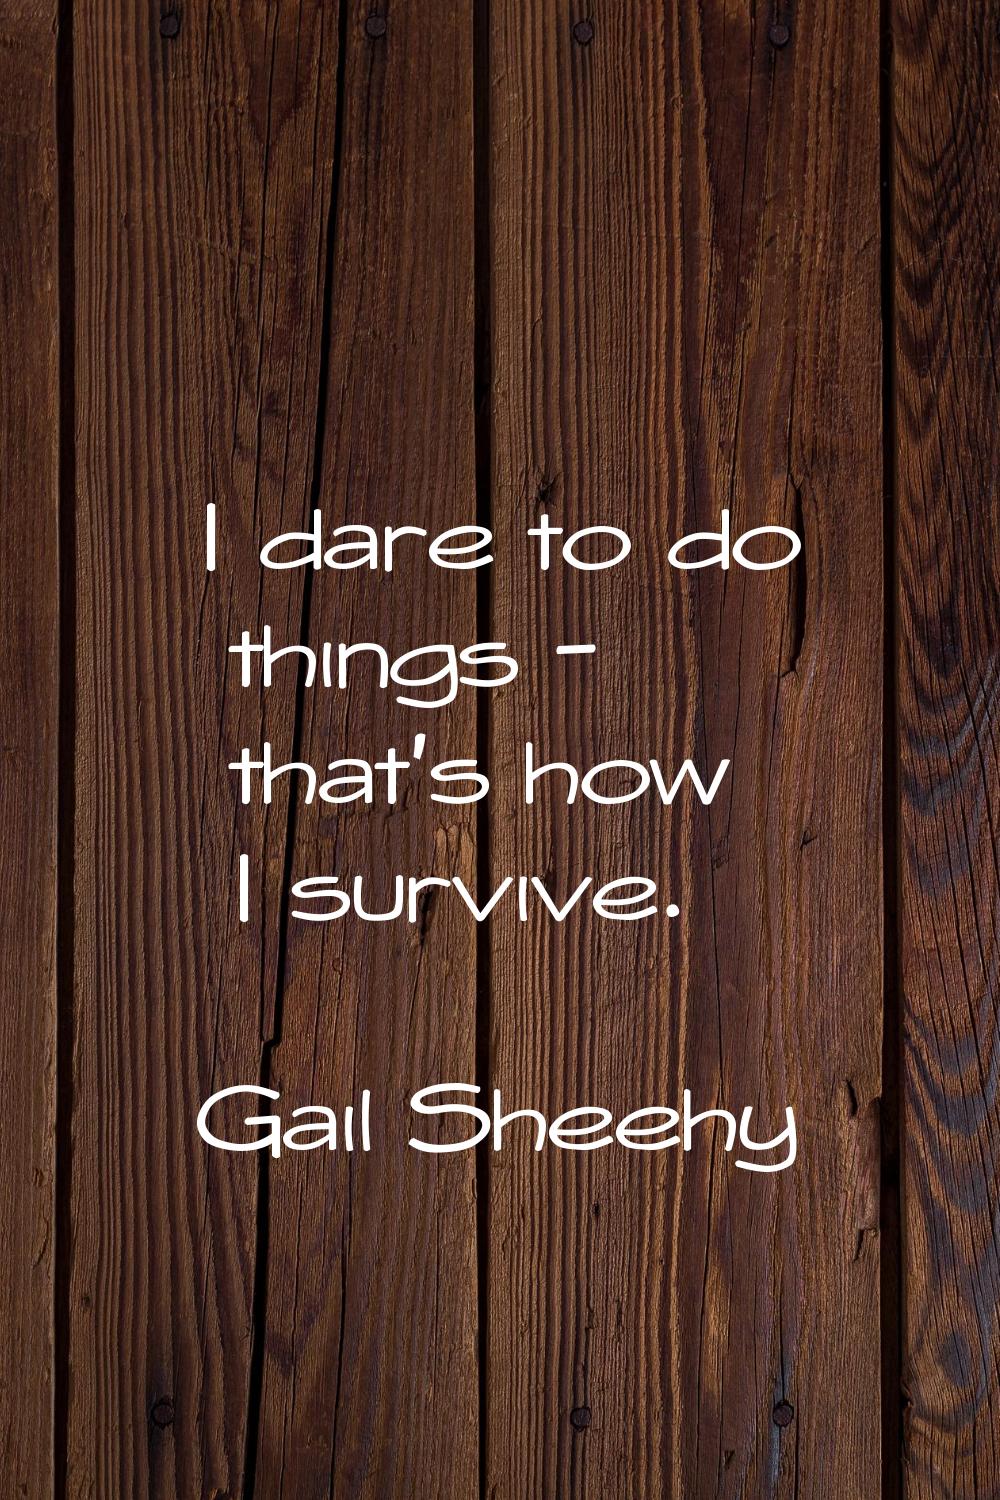 I dare to do things - that's how I survive.